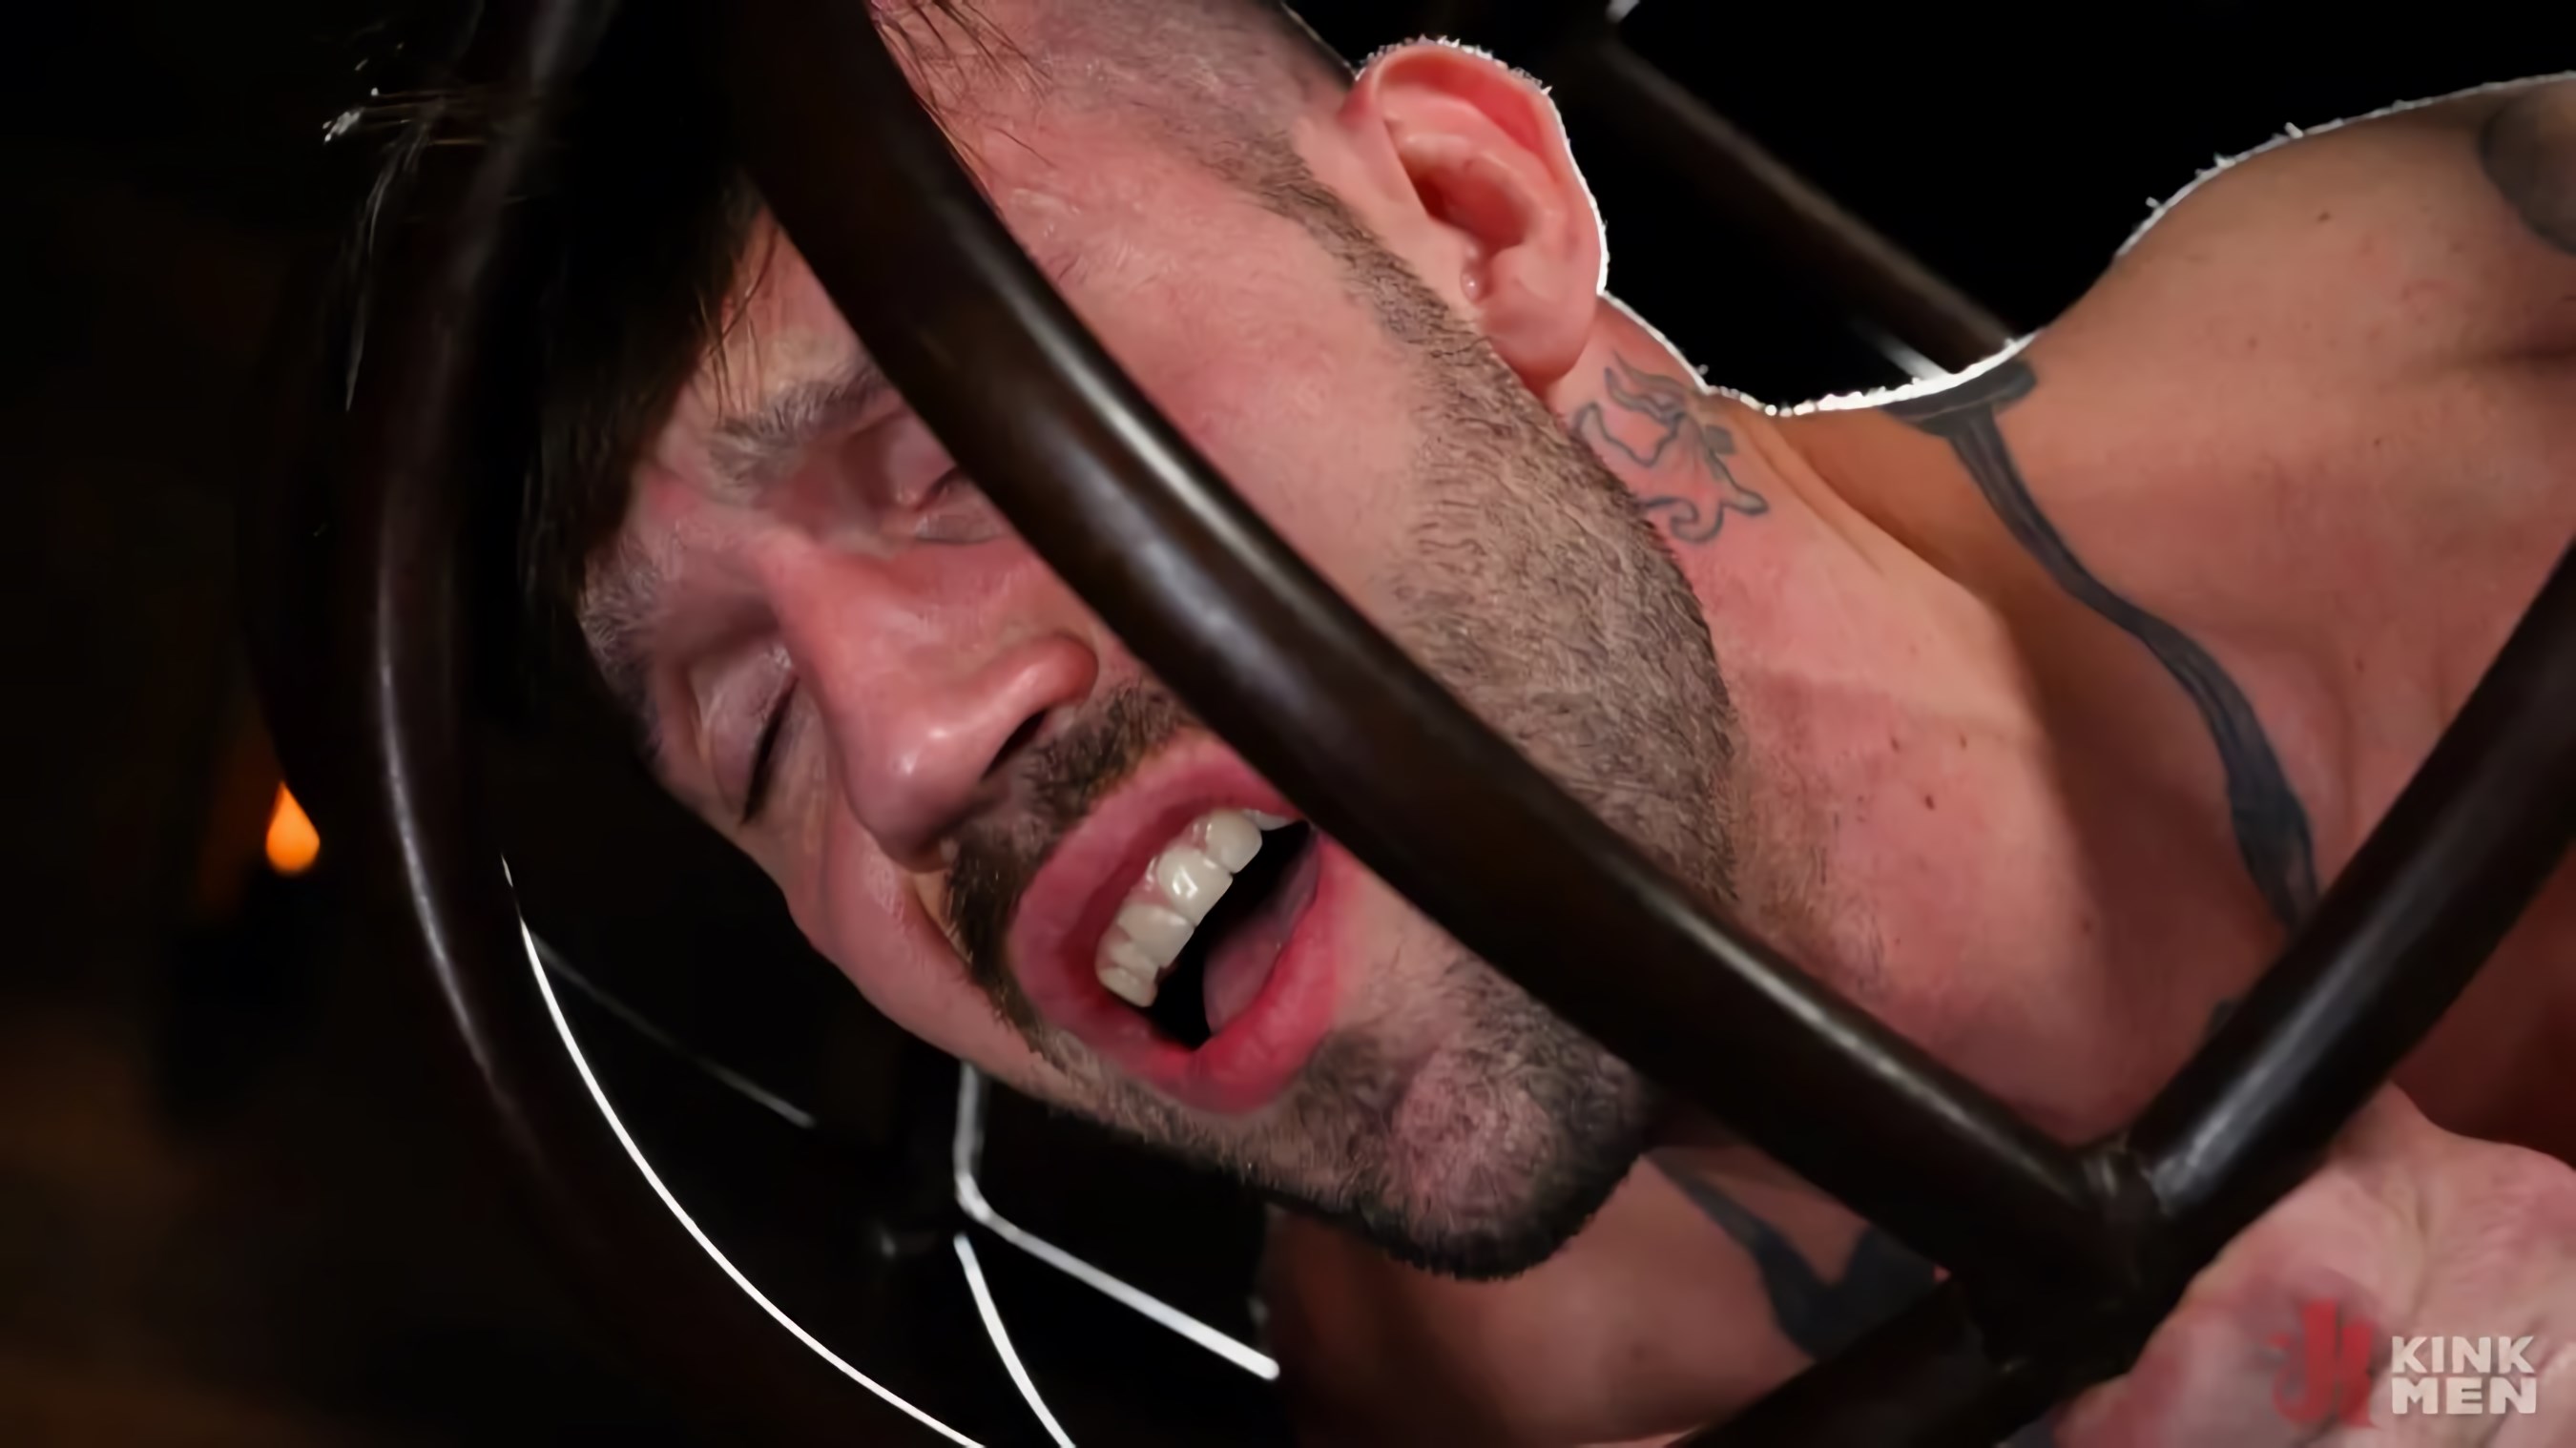 Kink Men 'TURTLE BOY: Buck Richards is fucked, flogged and bound in a metal cage and renamed Turtle Boy by Vander Pulaski' starring Vander Pulaski (Photo 28)